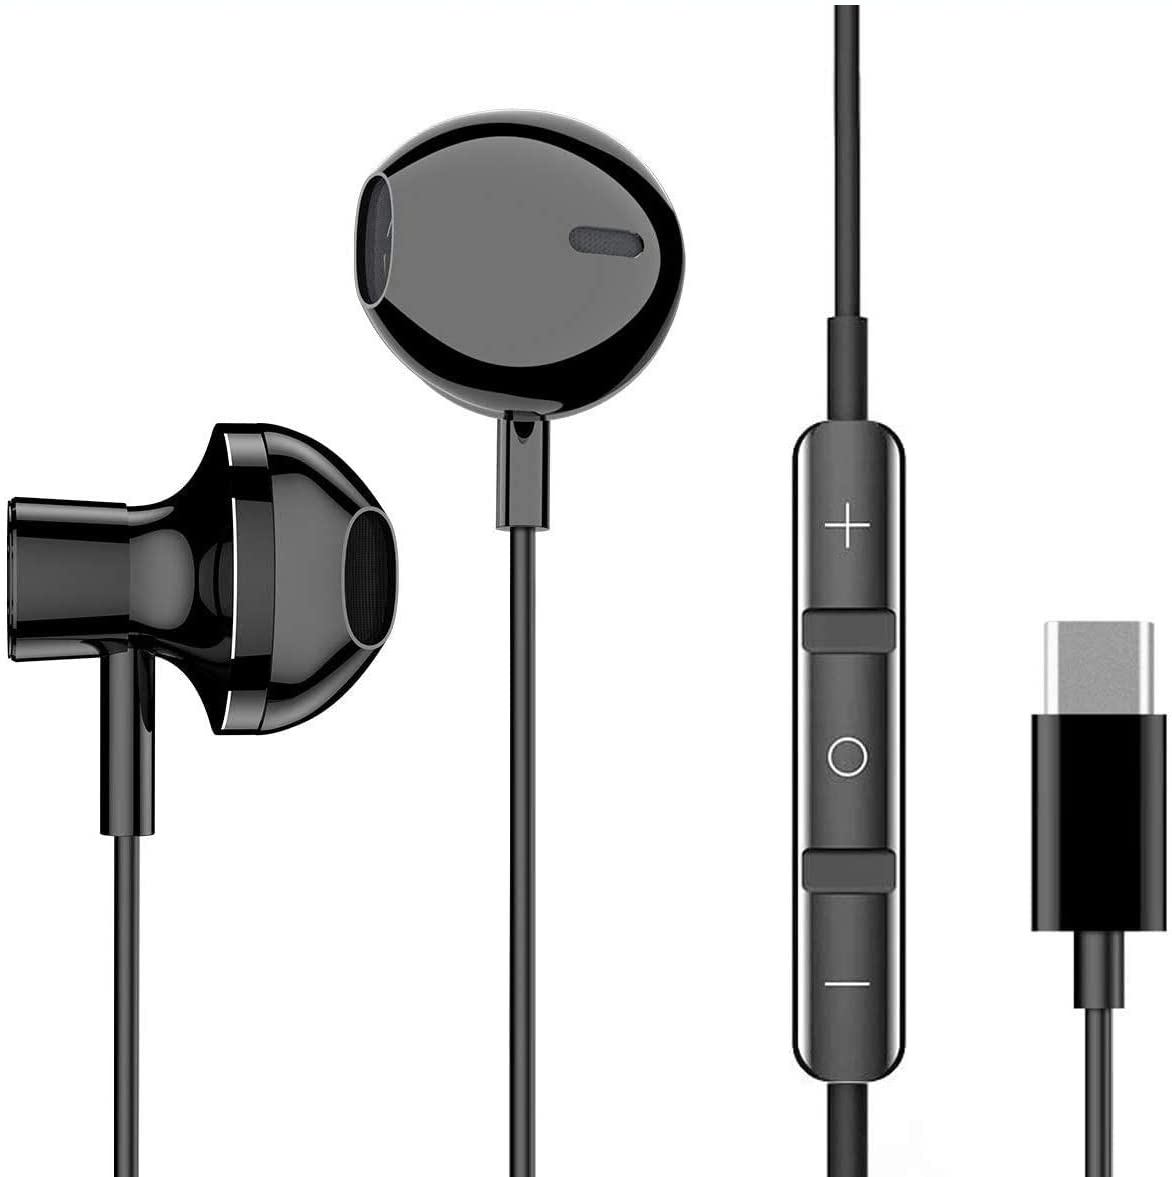 URBAN EXTREME USB Type C Earphones Stereo in Ear Earbuds with Mic and Volume Control Compatible with Samsung Galaxy S20 Ultra 5G - Black (US version with Warranty) - image 1 of 3